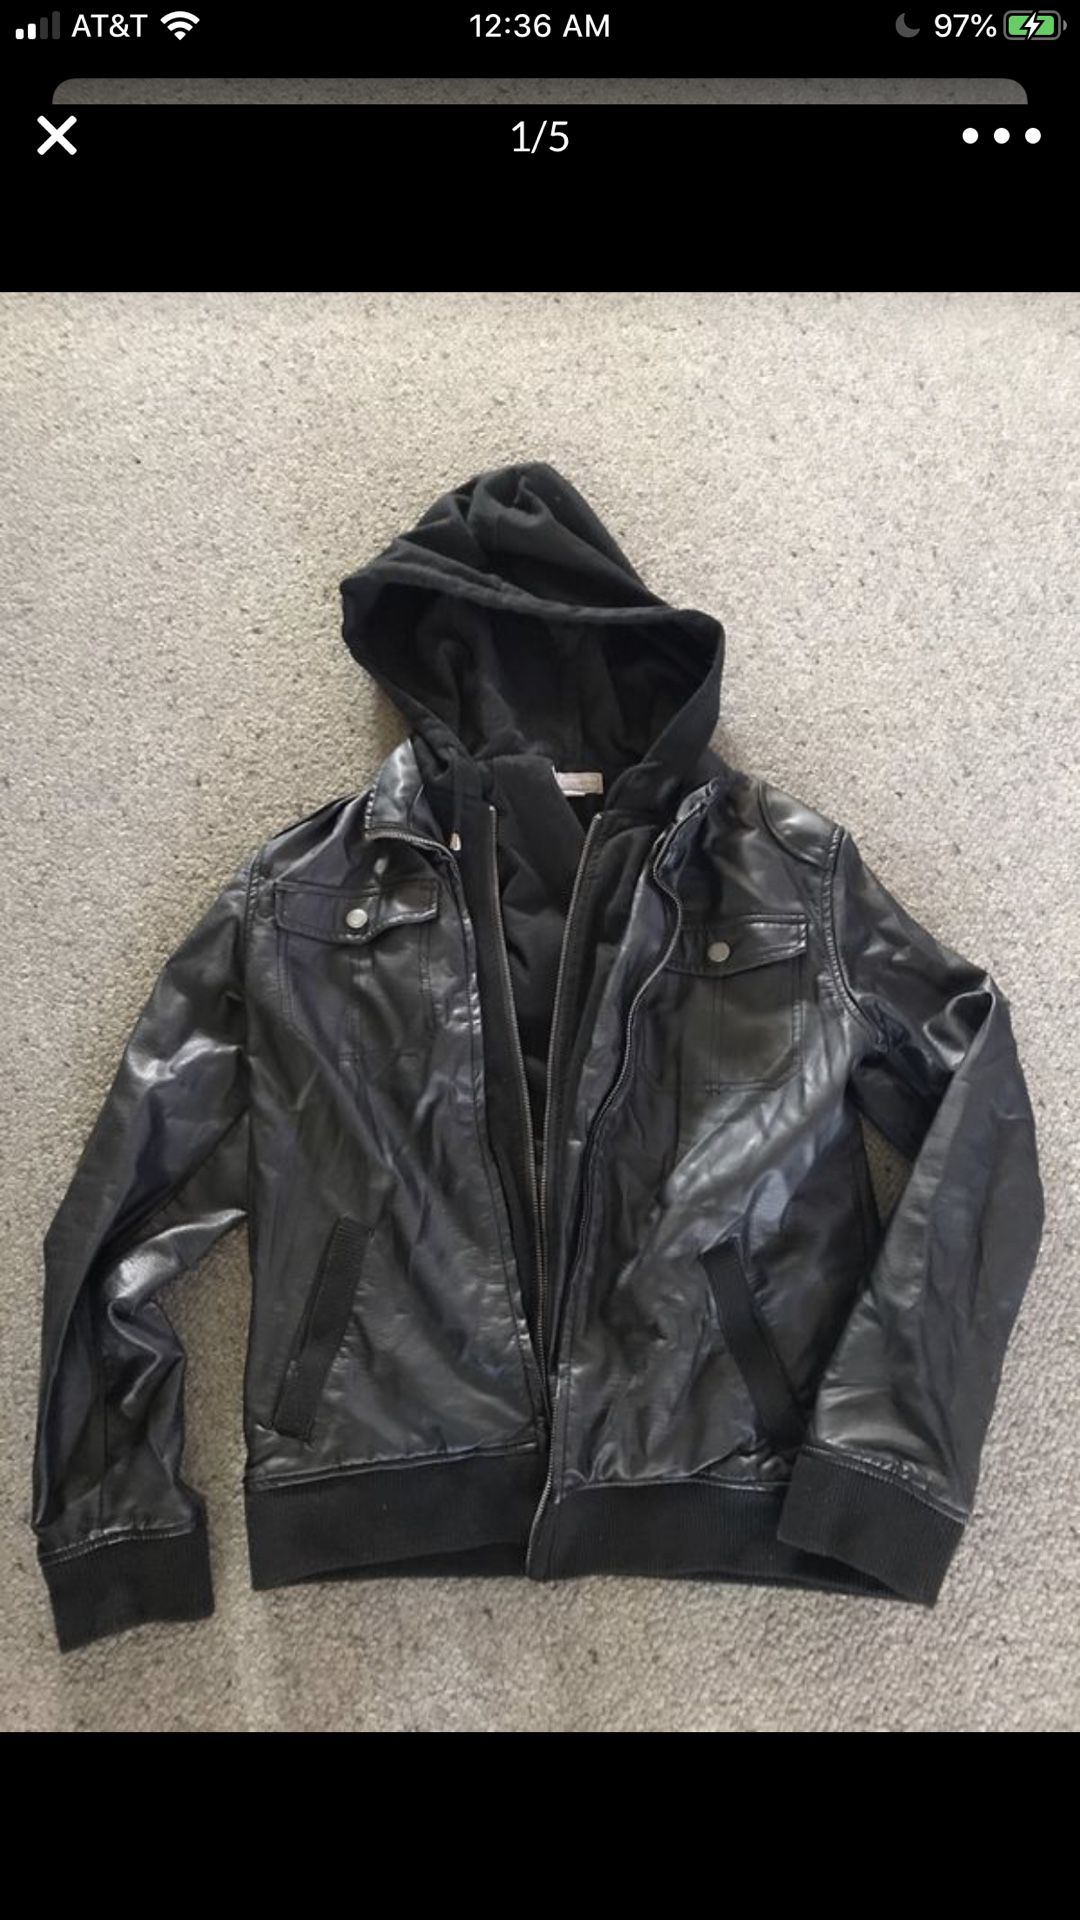 CHARLES AND HALF CREEPSTER JACKET: men's size small